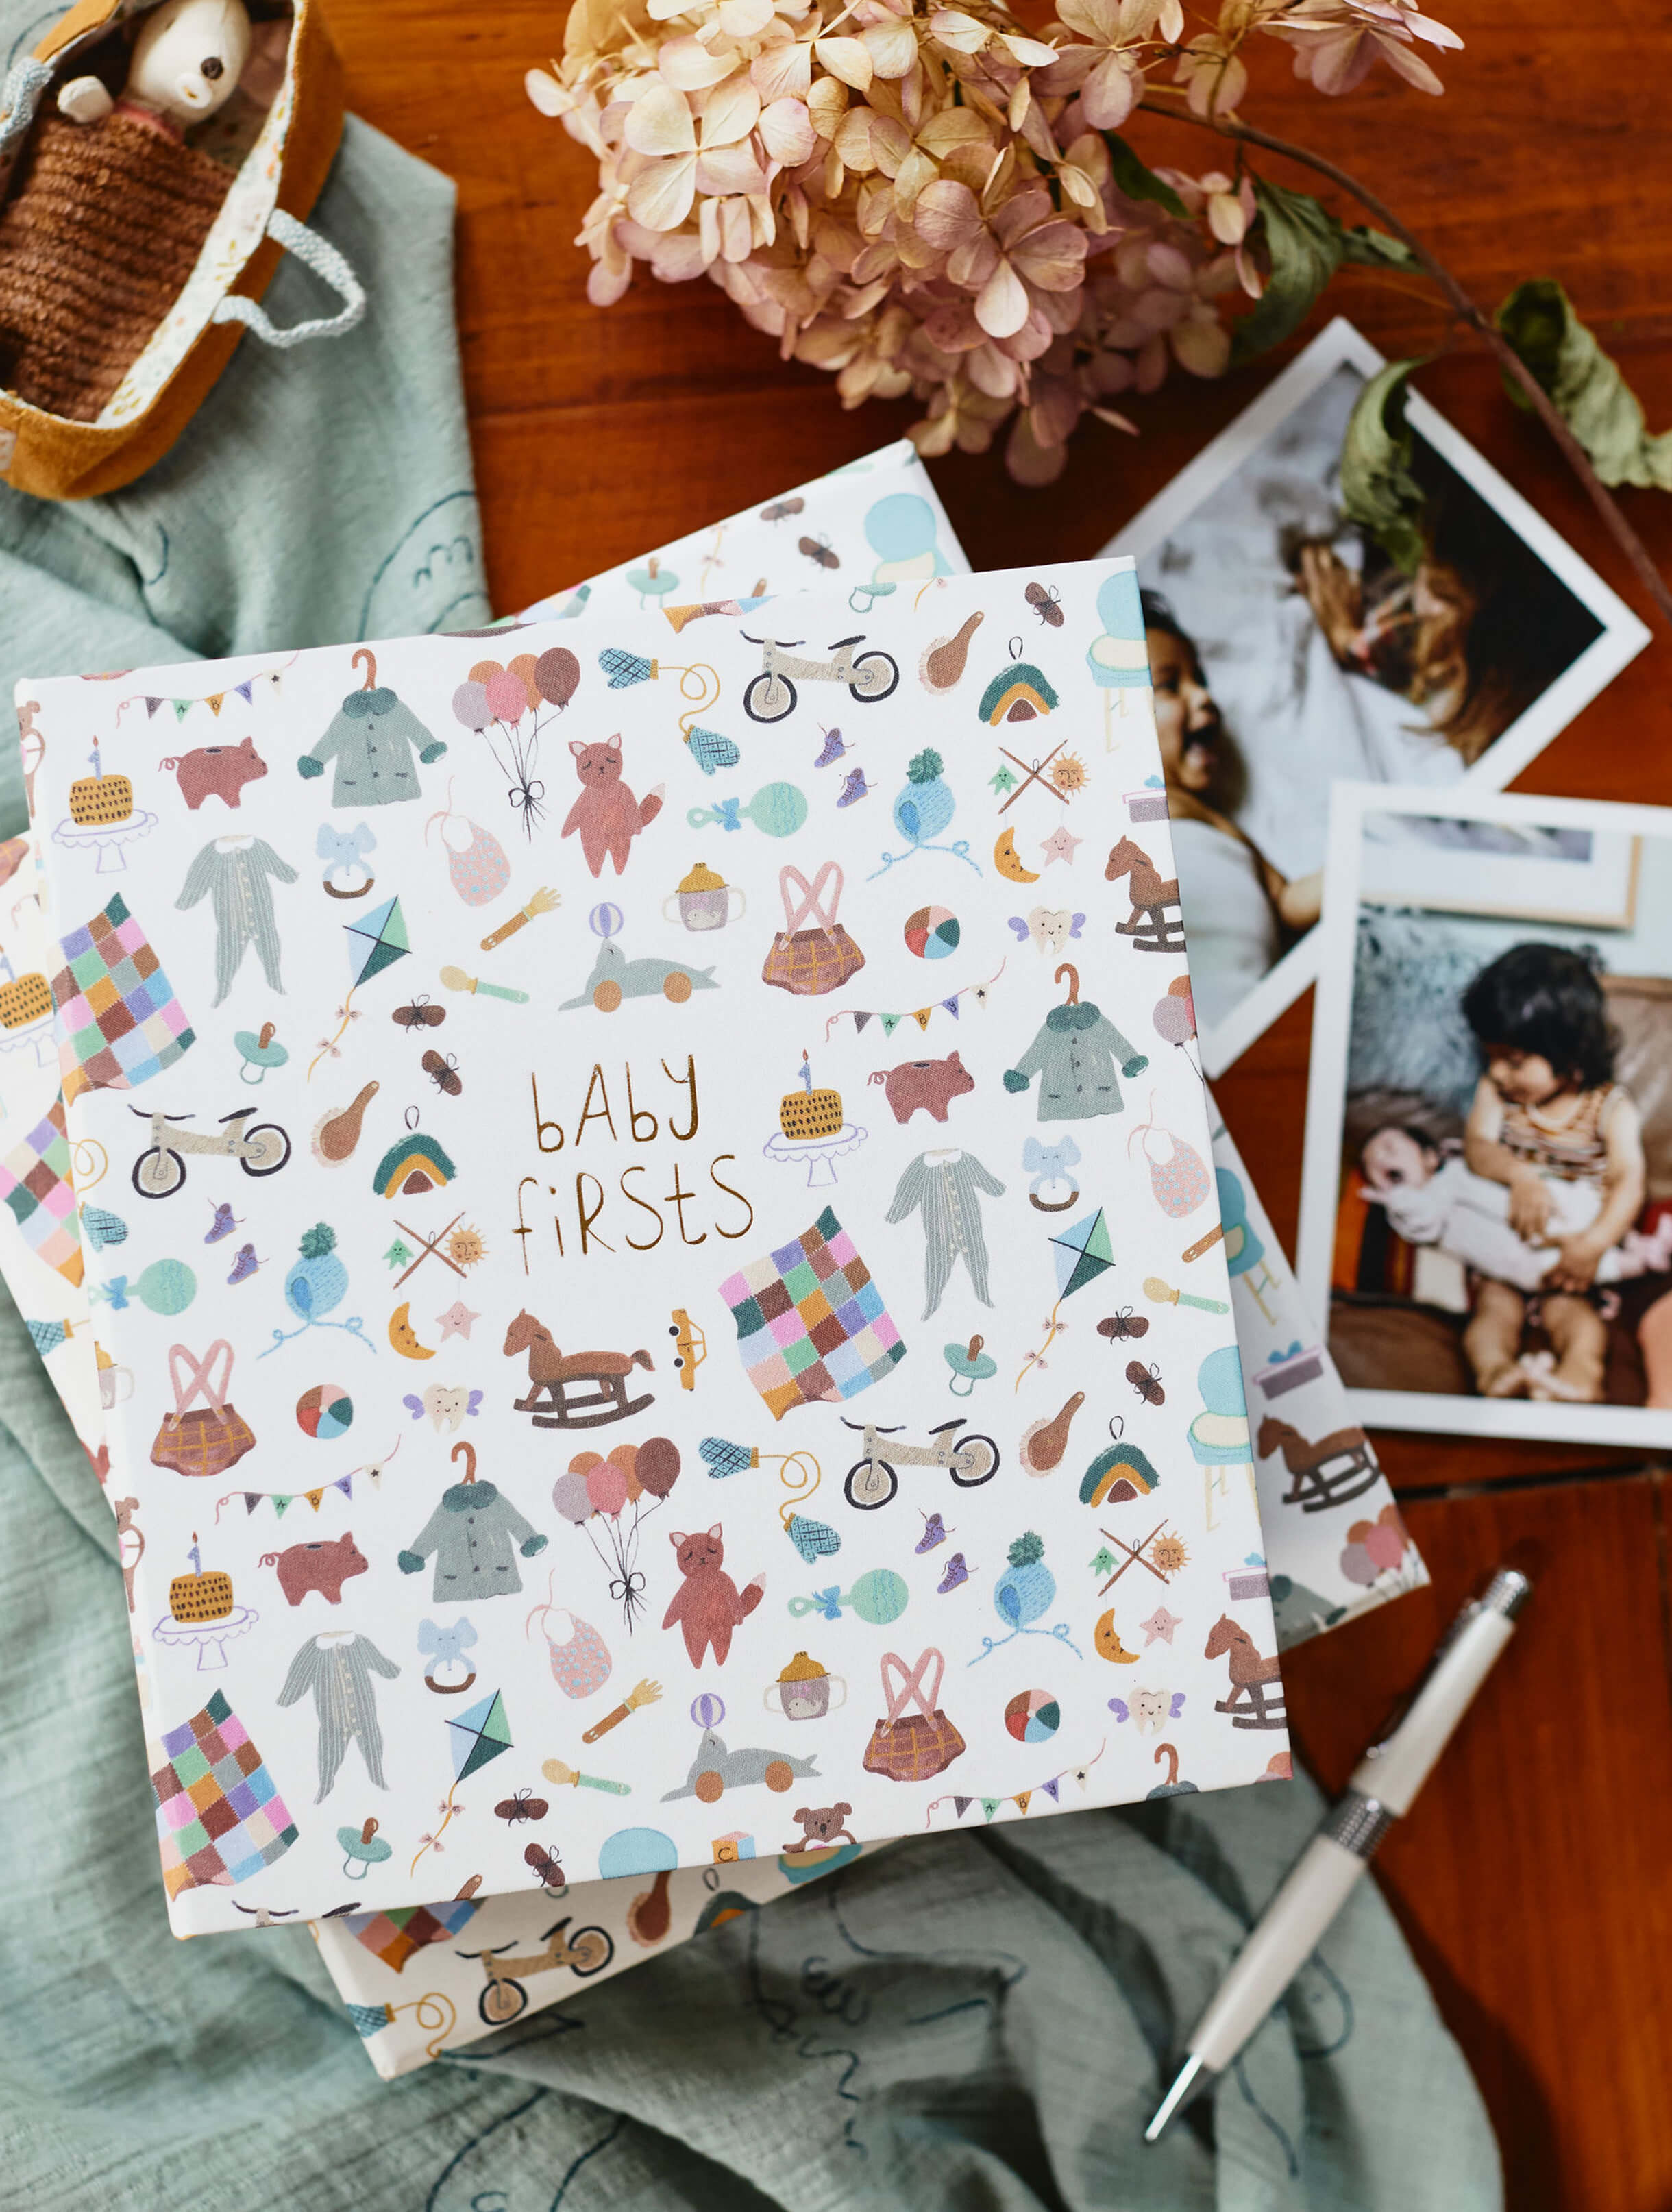 Write to Me | Baby Firsts - Boxed Journal